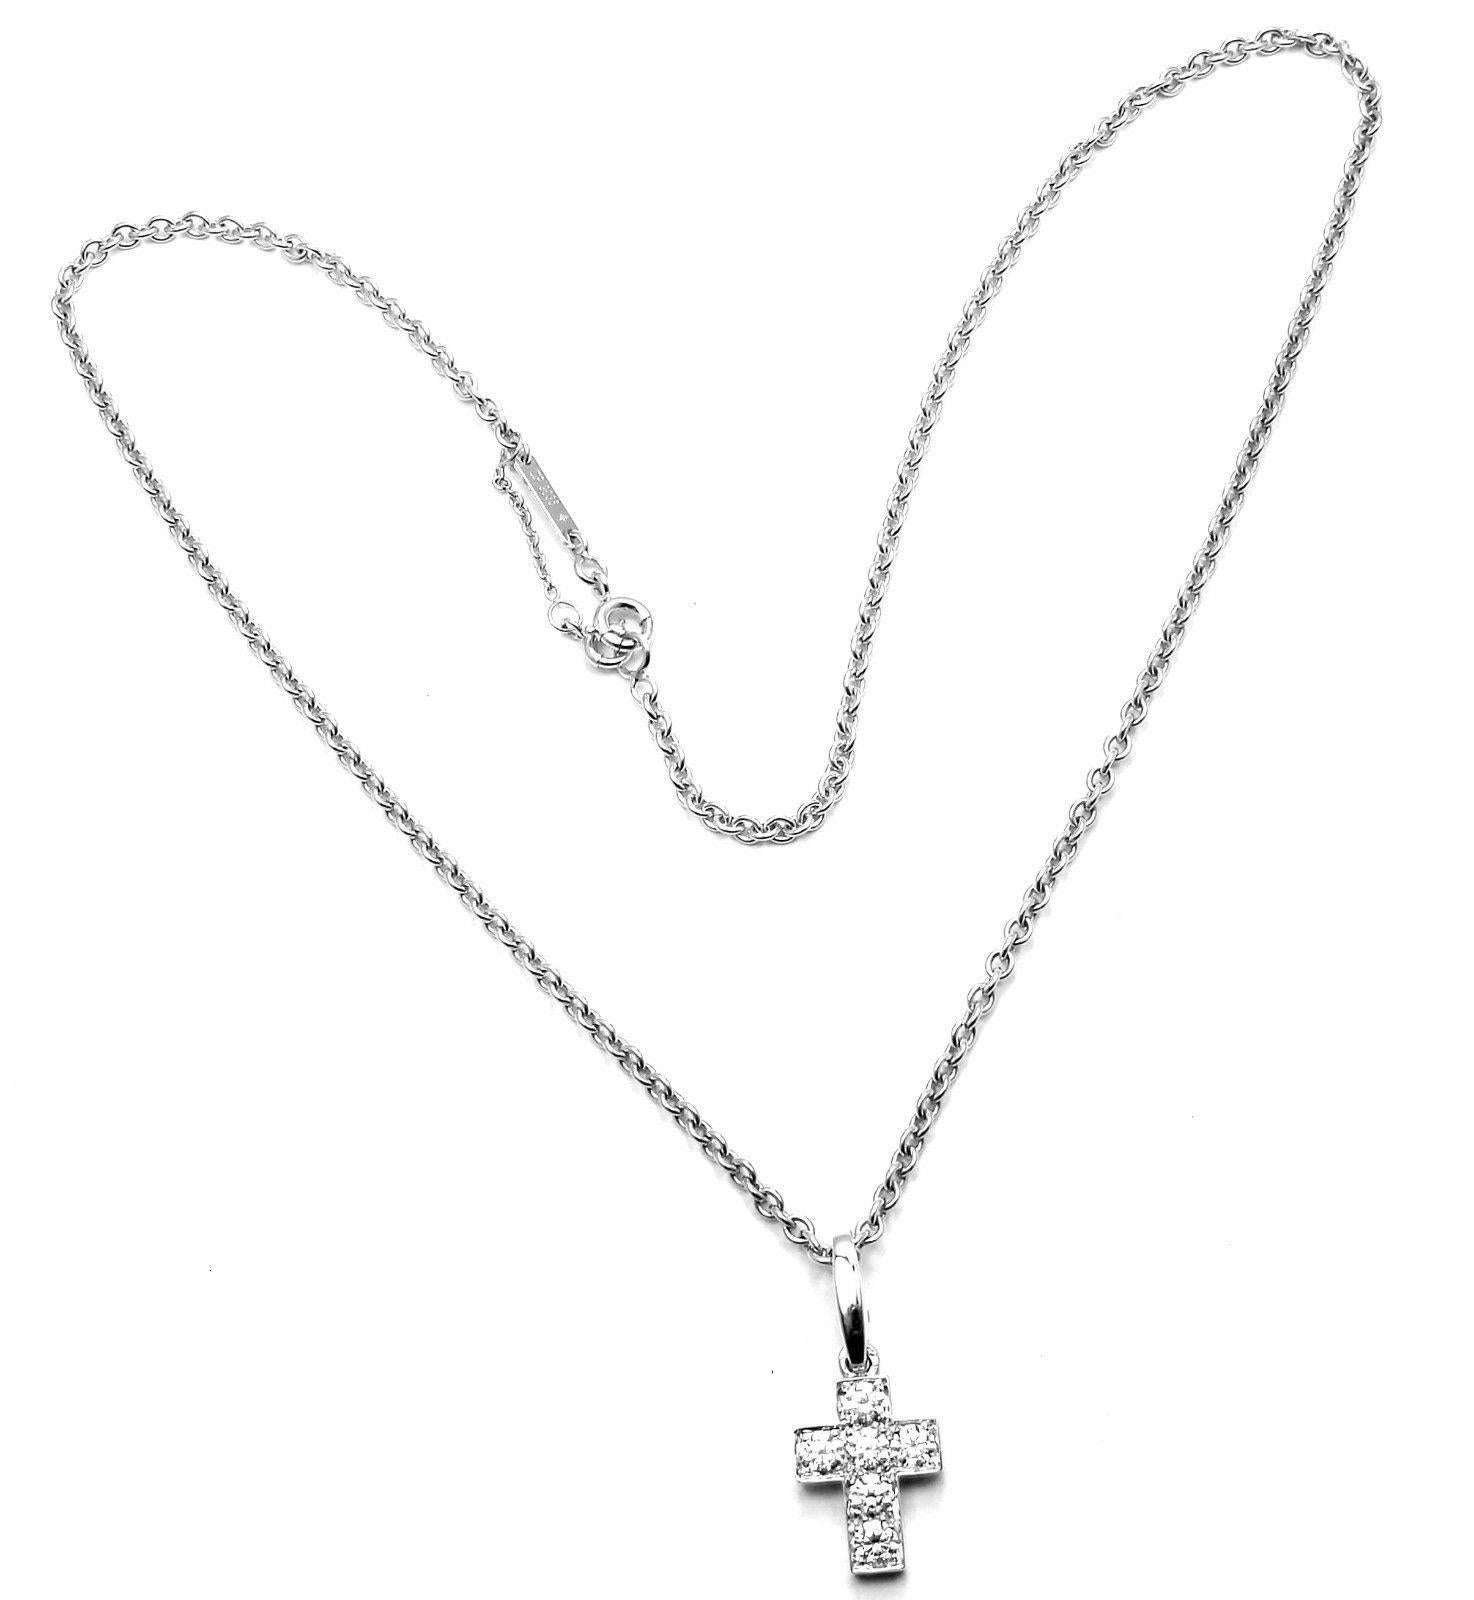 18k White Gold Diamond Cross Pendant Necklace by Cartier. 
With 6 round brilliant cut diamonds VVS1 clarity, E color total weight approx. .95ctw
This necklace comes with service paper from Cartier store in Japan.

Details: 
Length: 16.5